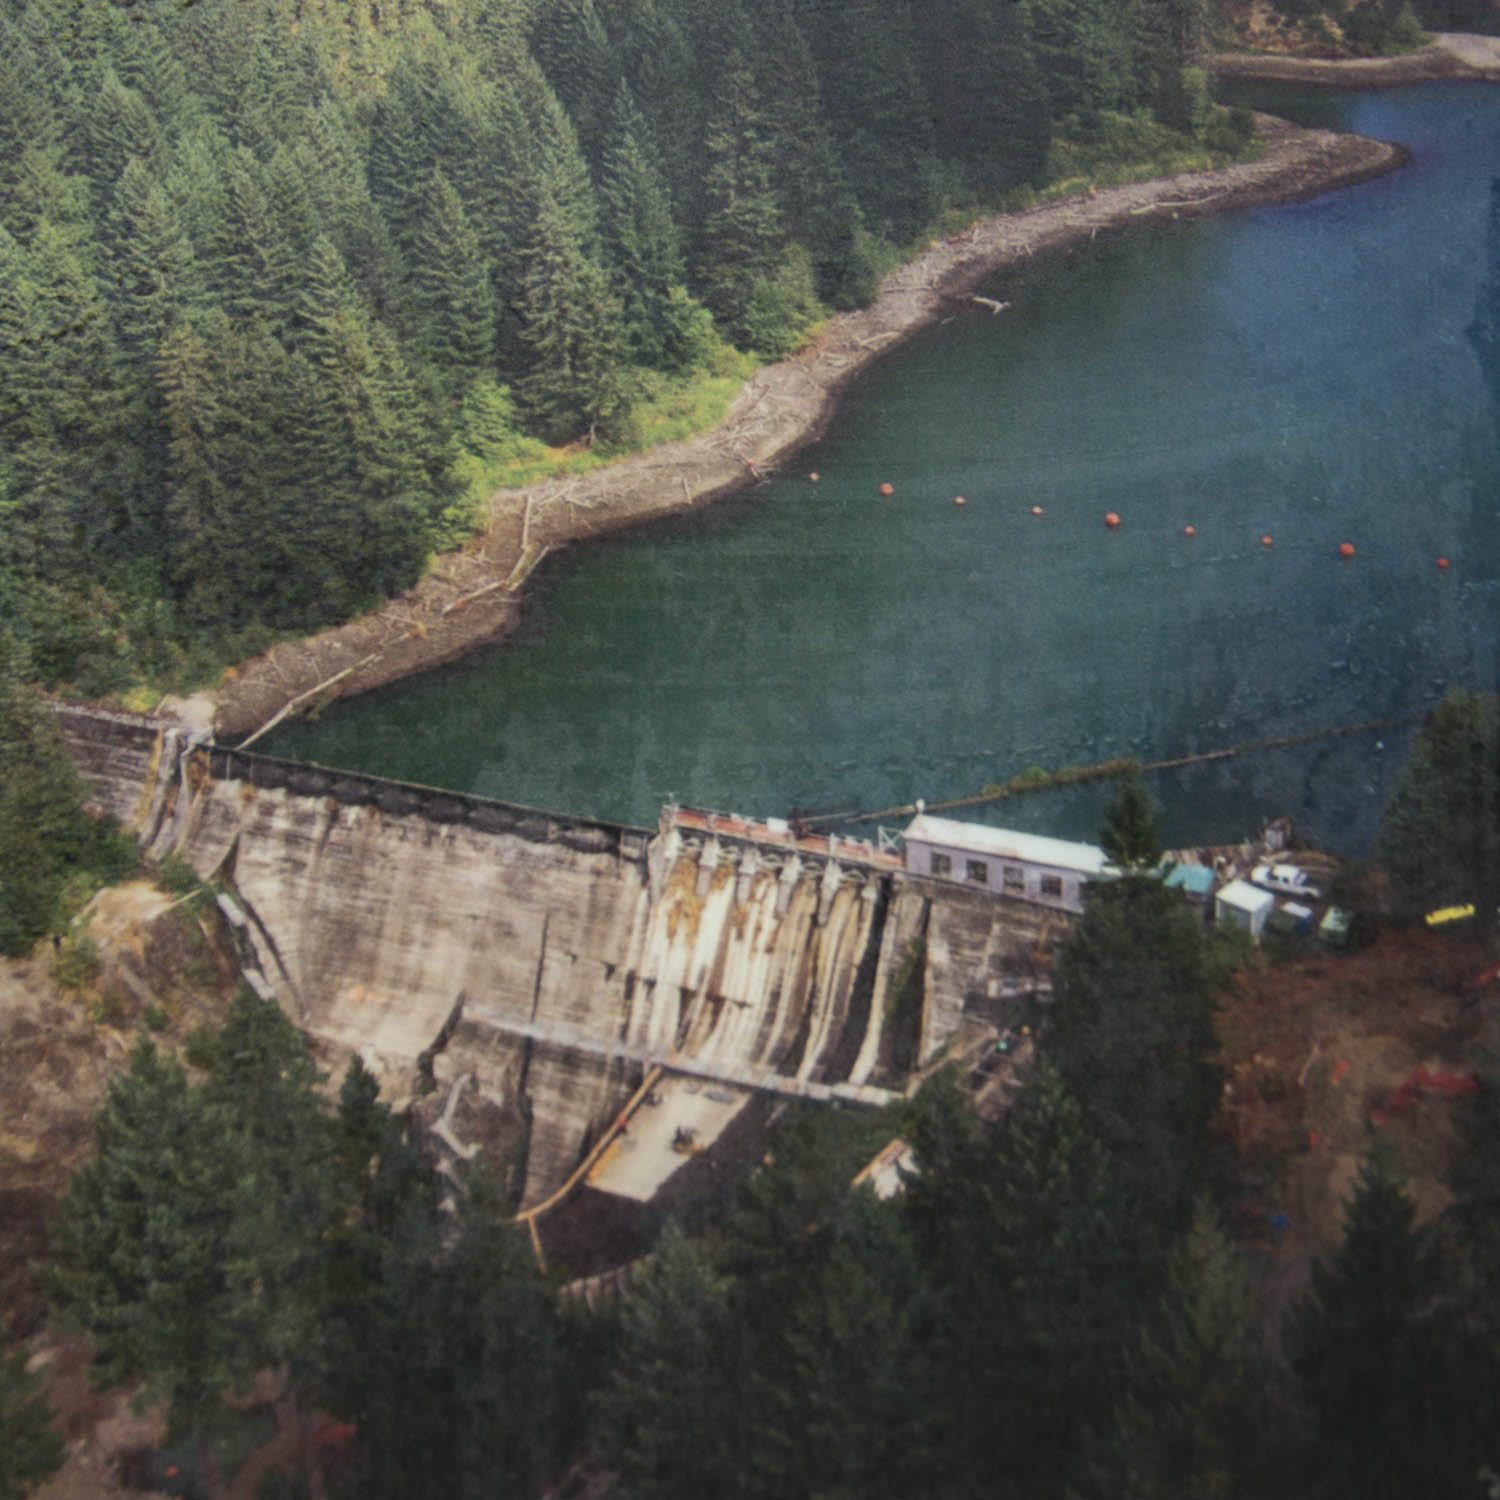 USA: Washington, Columbia River Basin, White Salmon River Basin, signage showing aerial photo of Condit Dam and its reservoir then called Northwestern Lake (now Northwestern Park) before its removal in 2011, sign at Northwestern Park River Access